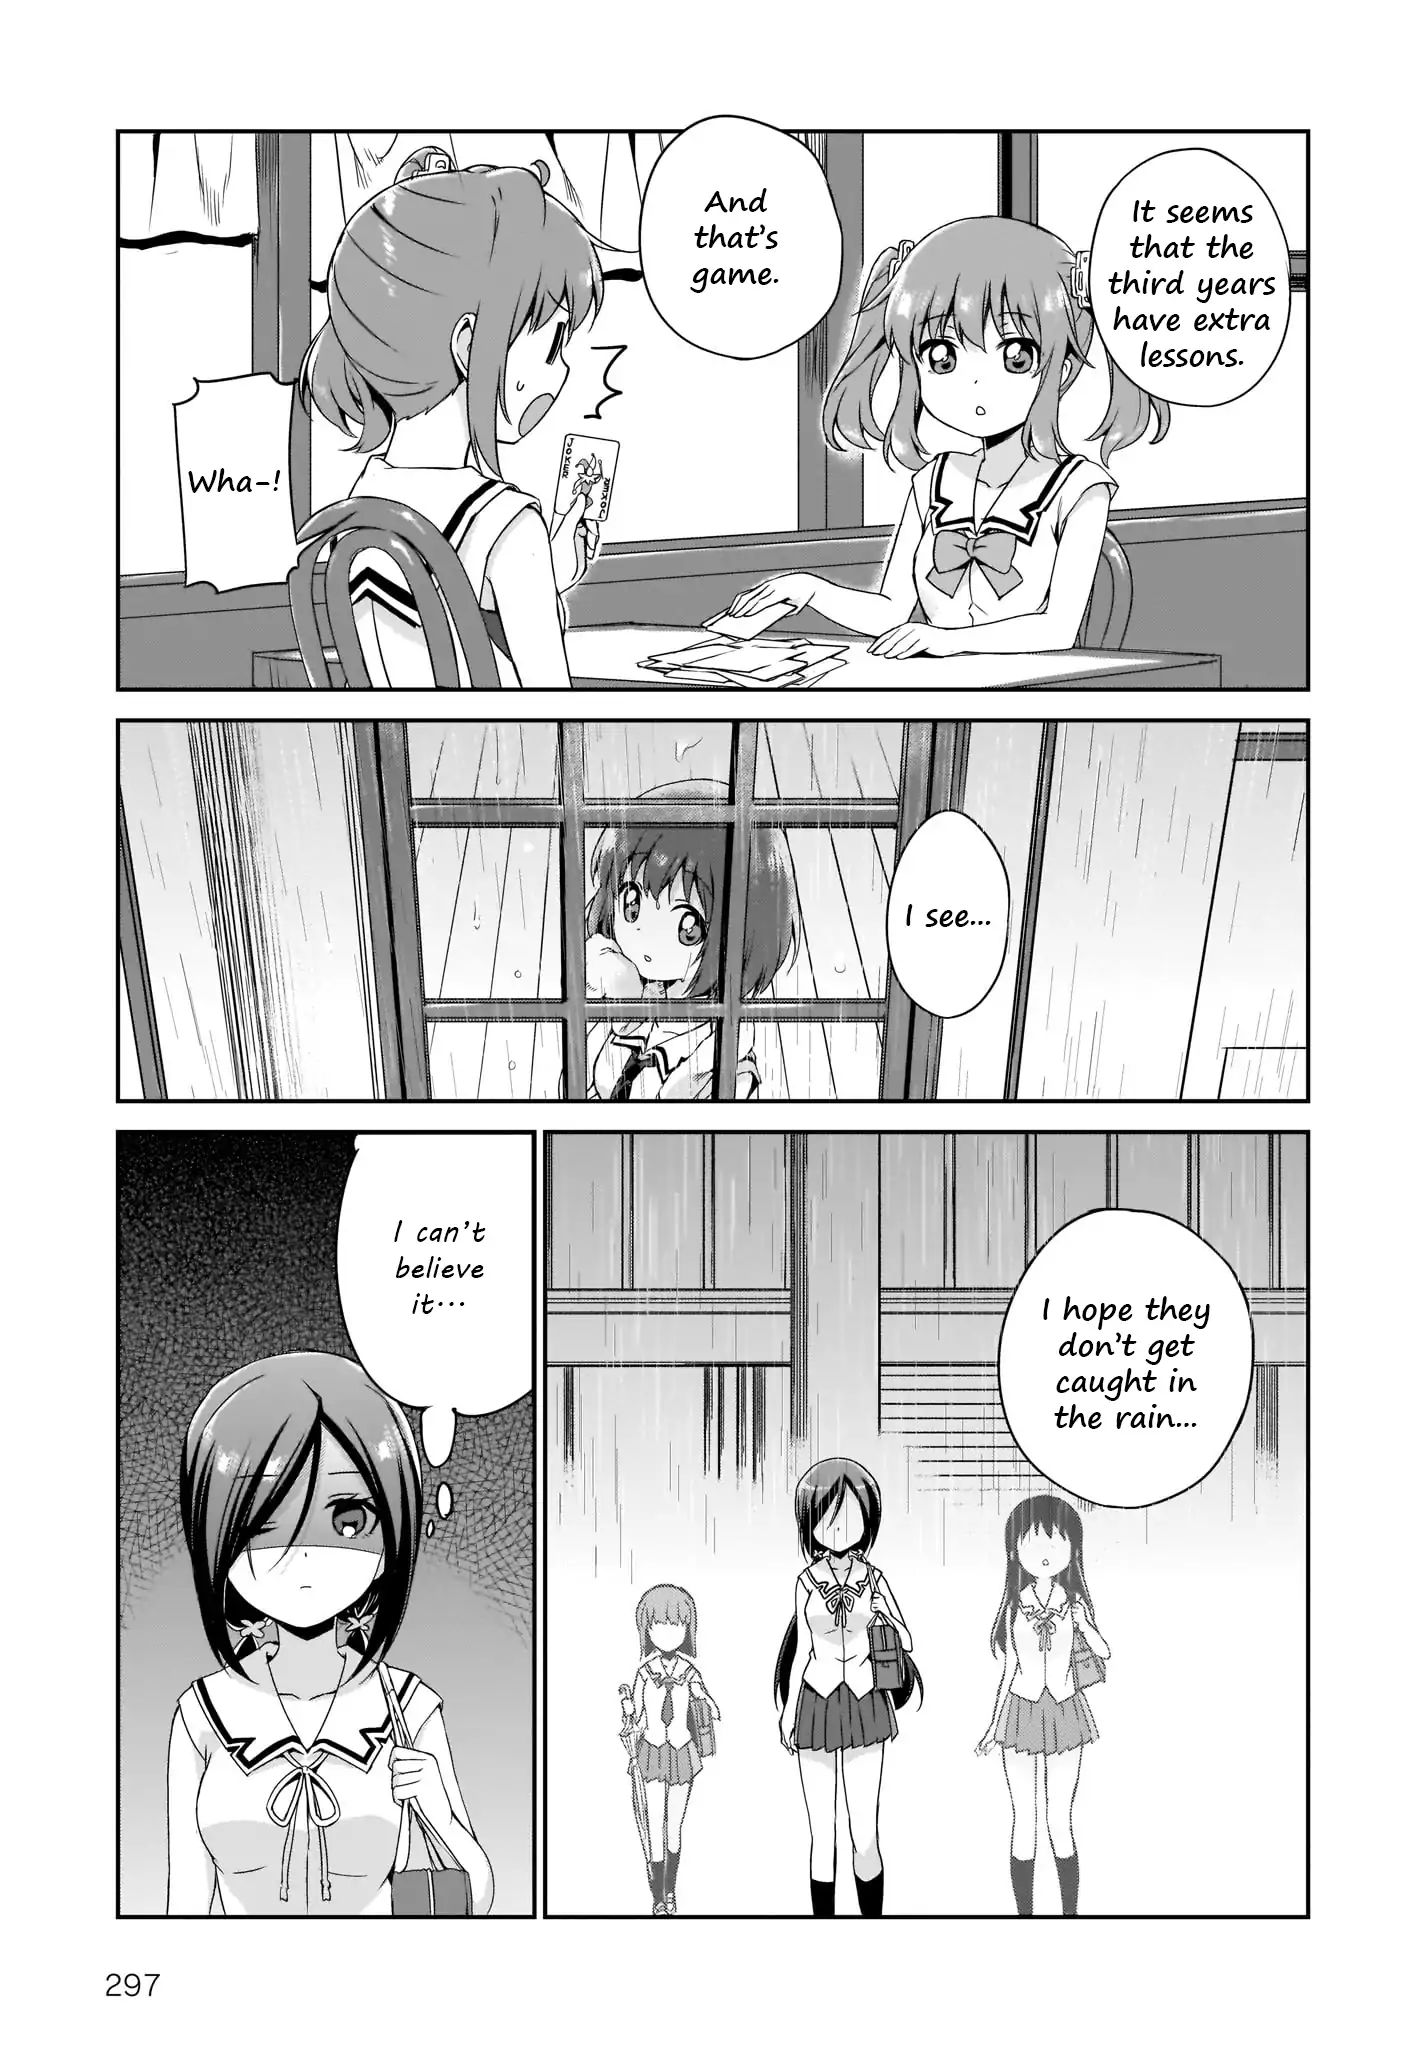 Release The Spyce - Secret Mission - Page 3